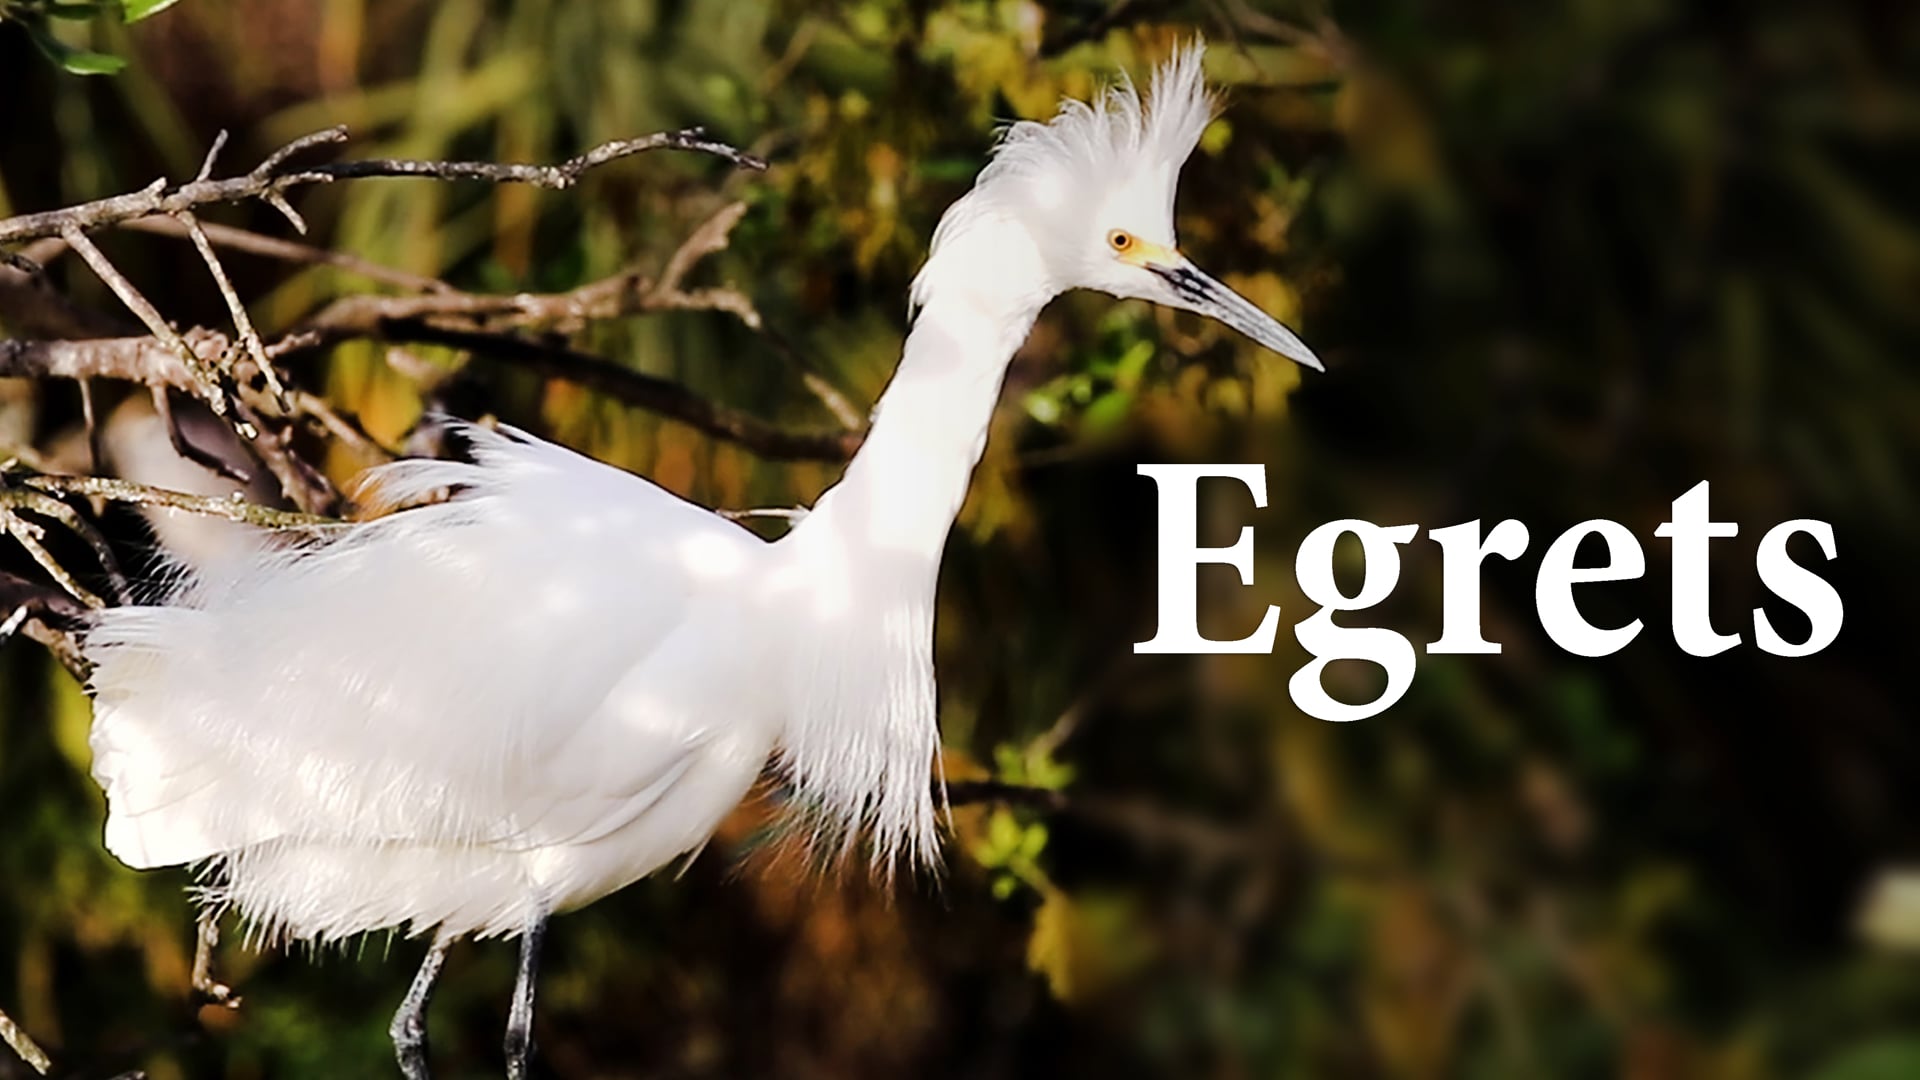 Great White and Snowy Egrets by Geoffrey C. Smith